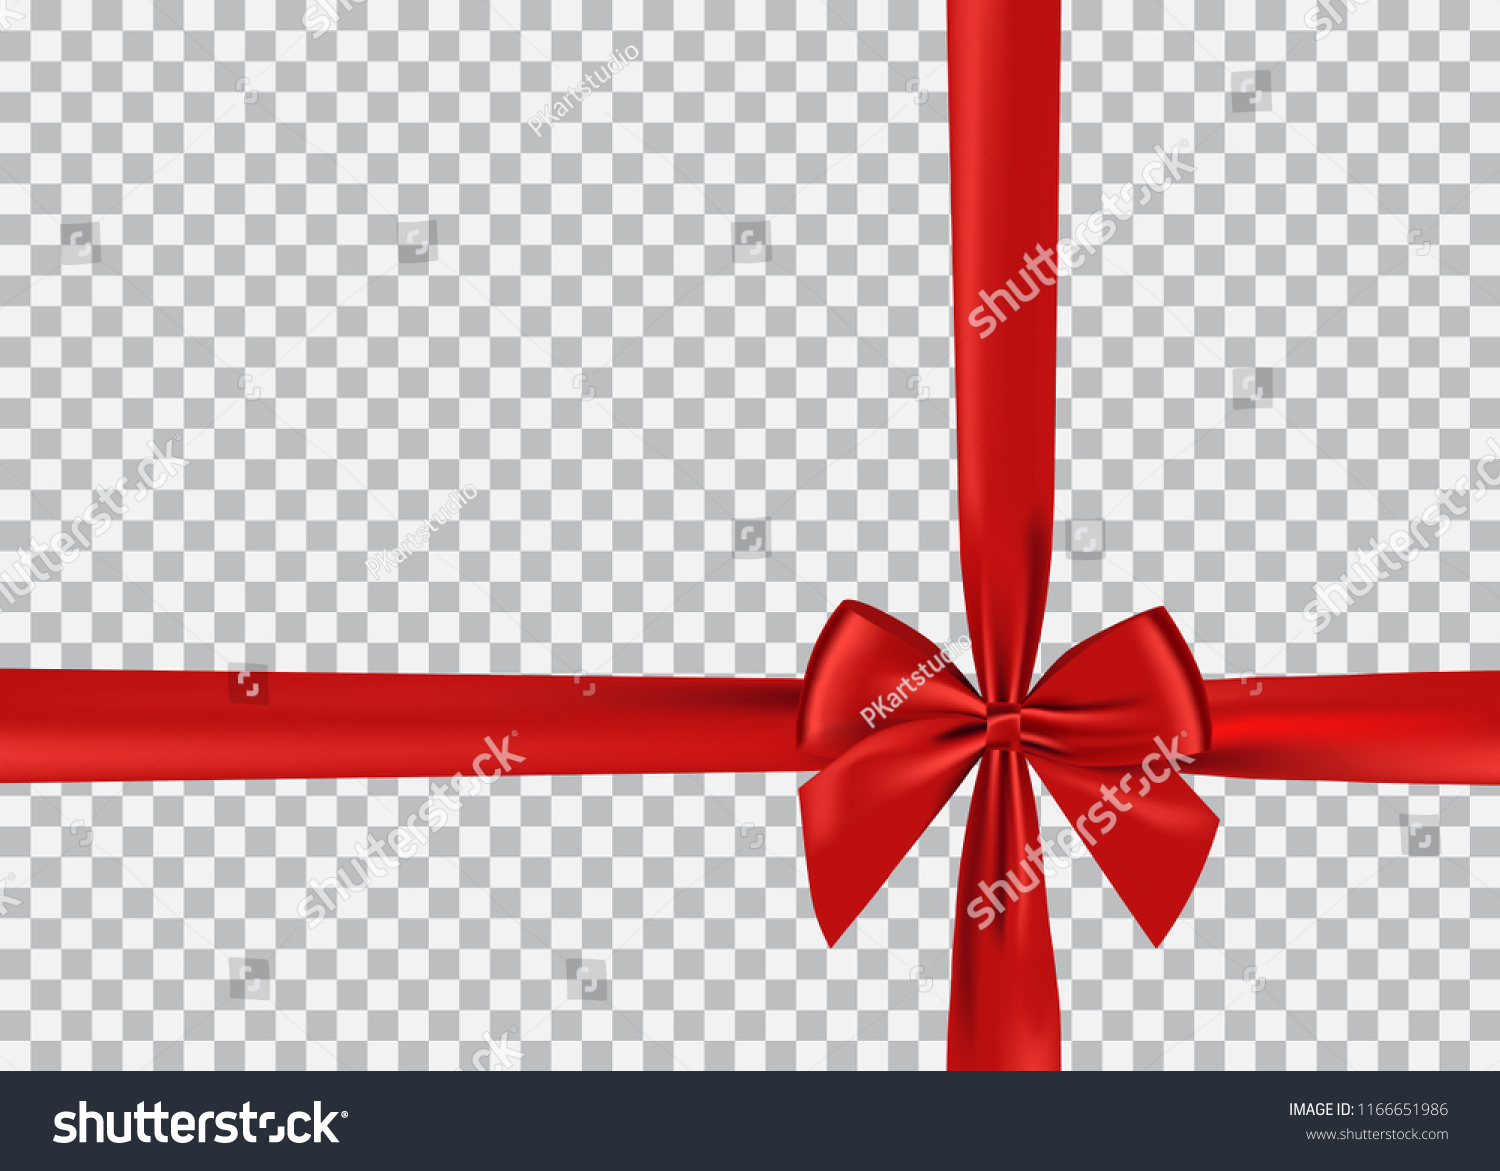 23,393 Red ribbon on transparent background Stock Illustrations, Images ...